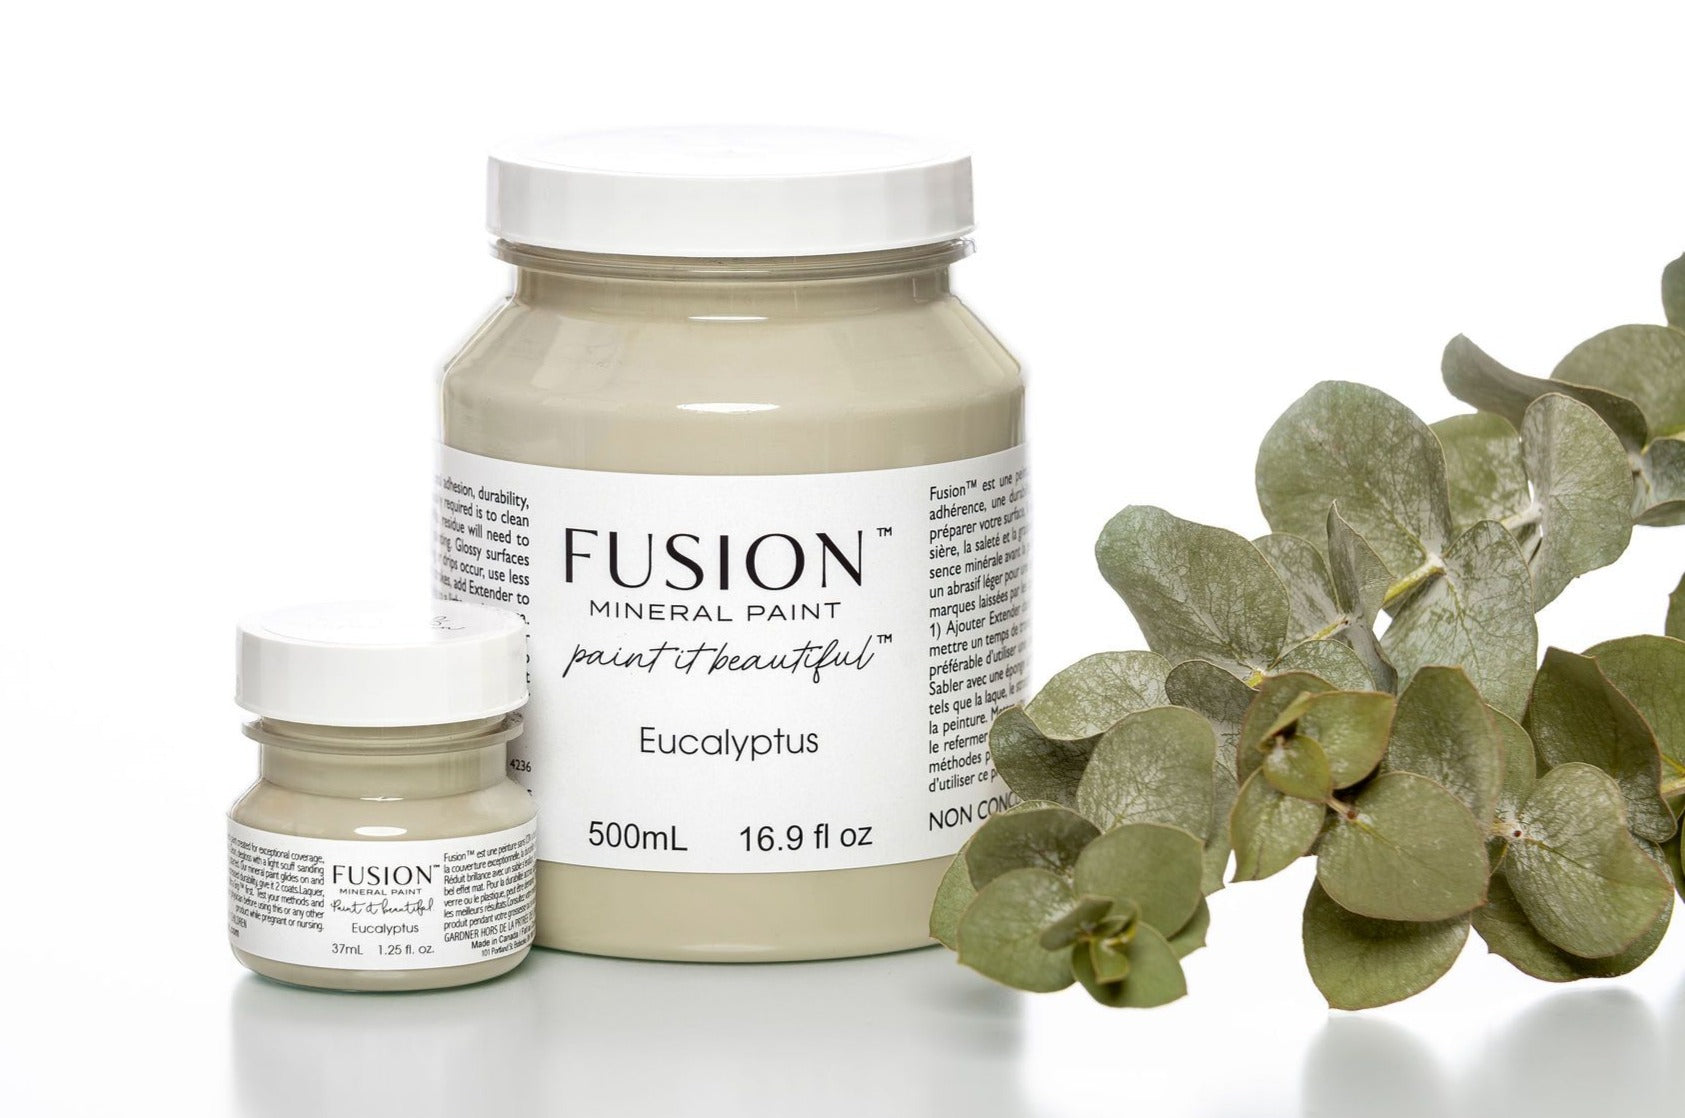 Fusion Mineral Paint - Eucalyptus - Rustic River Home